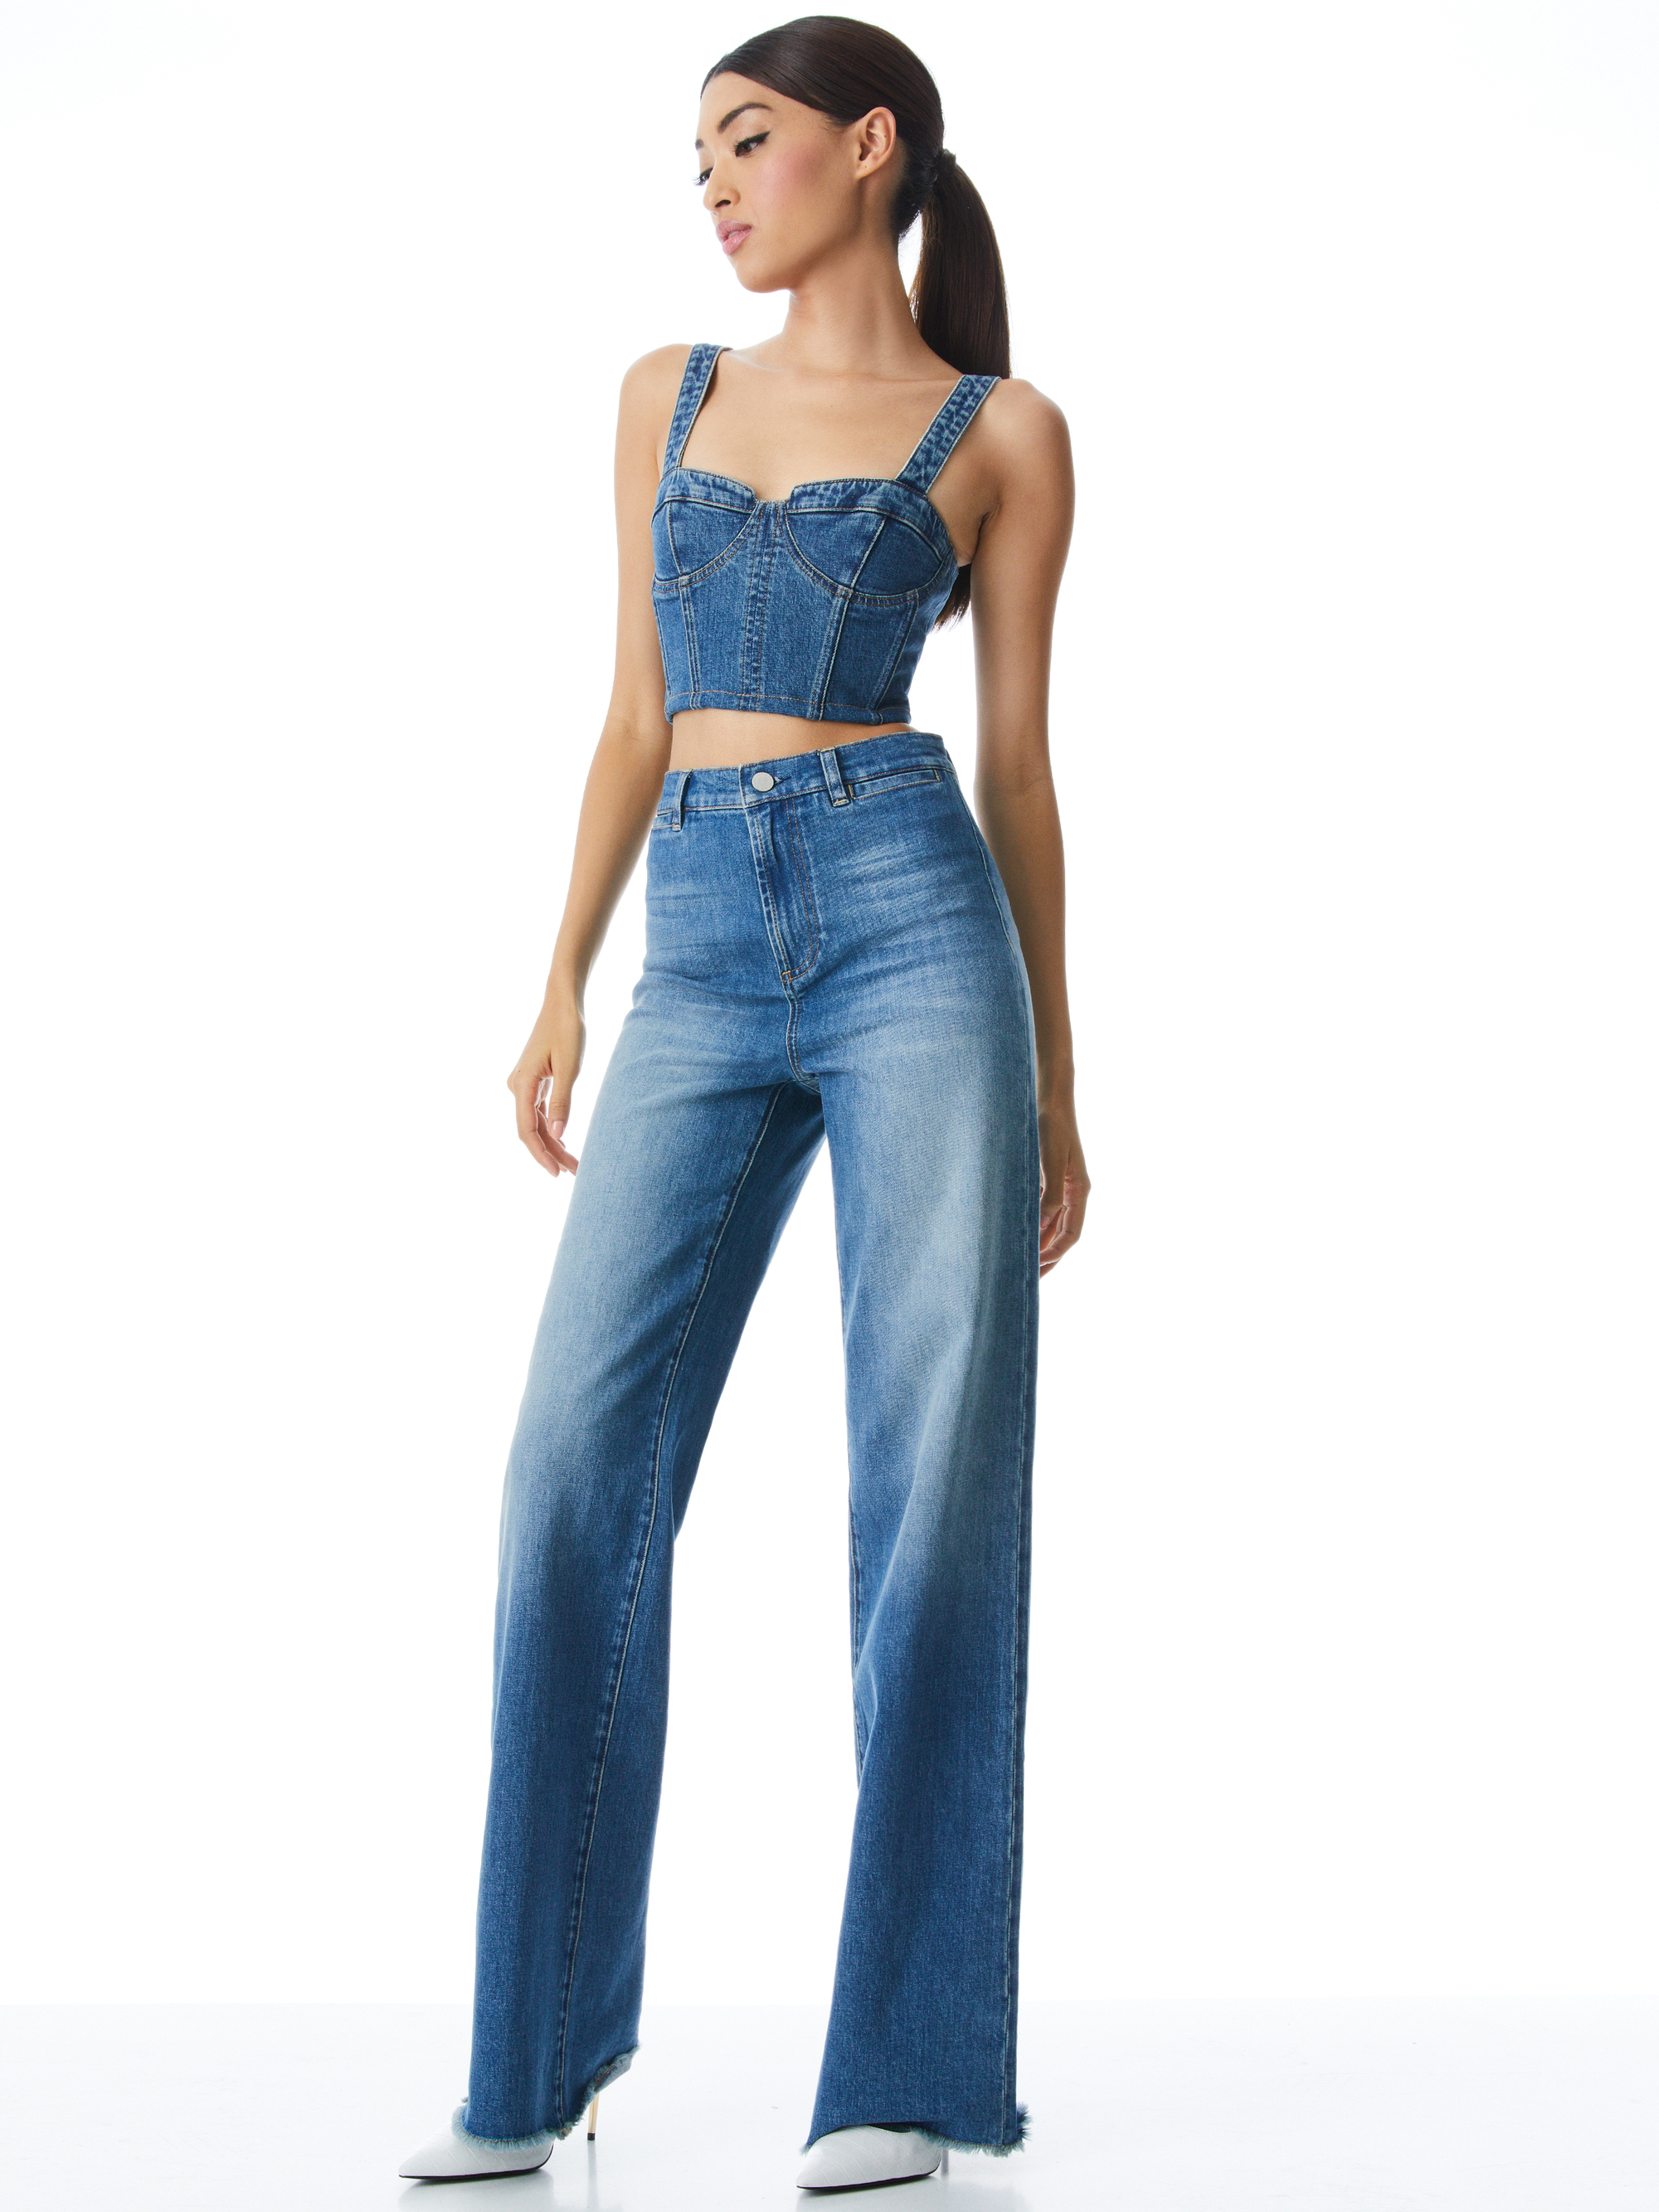 Jeanna Denim Bustier Crop Top In Best Intentions | Alice And Olivia